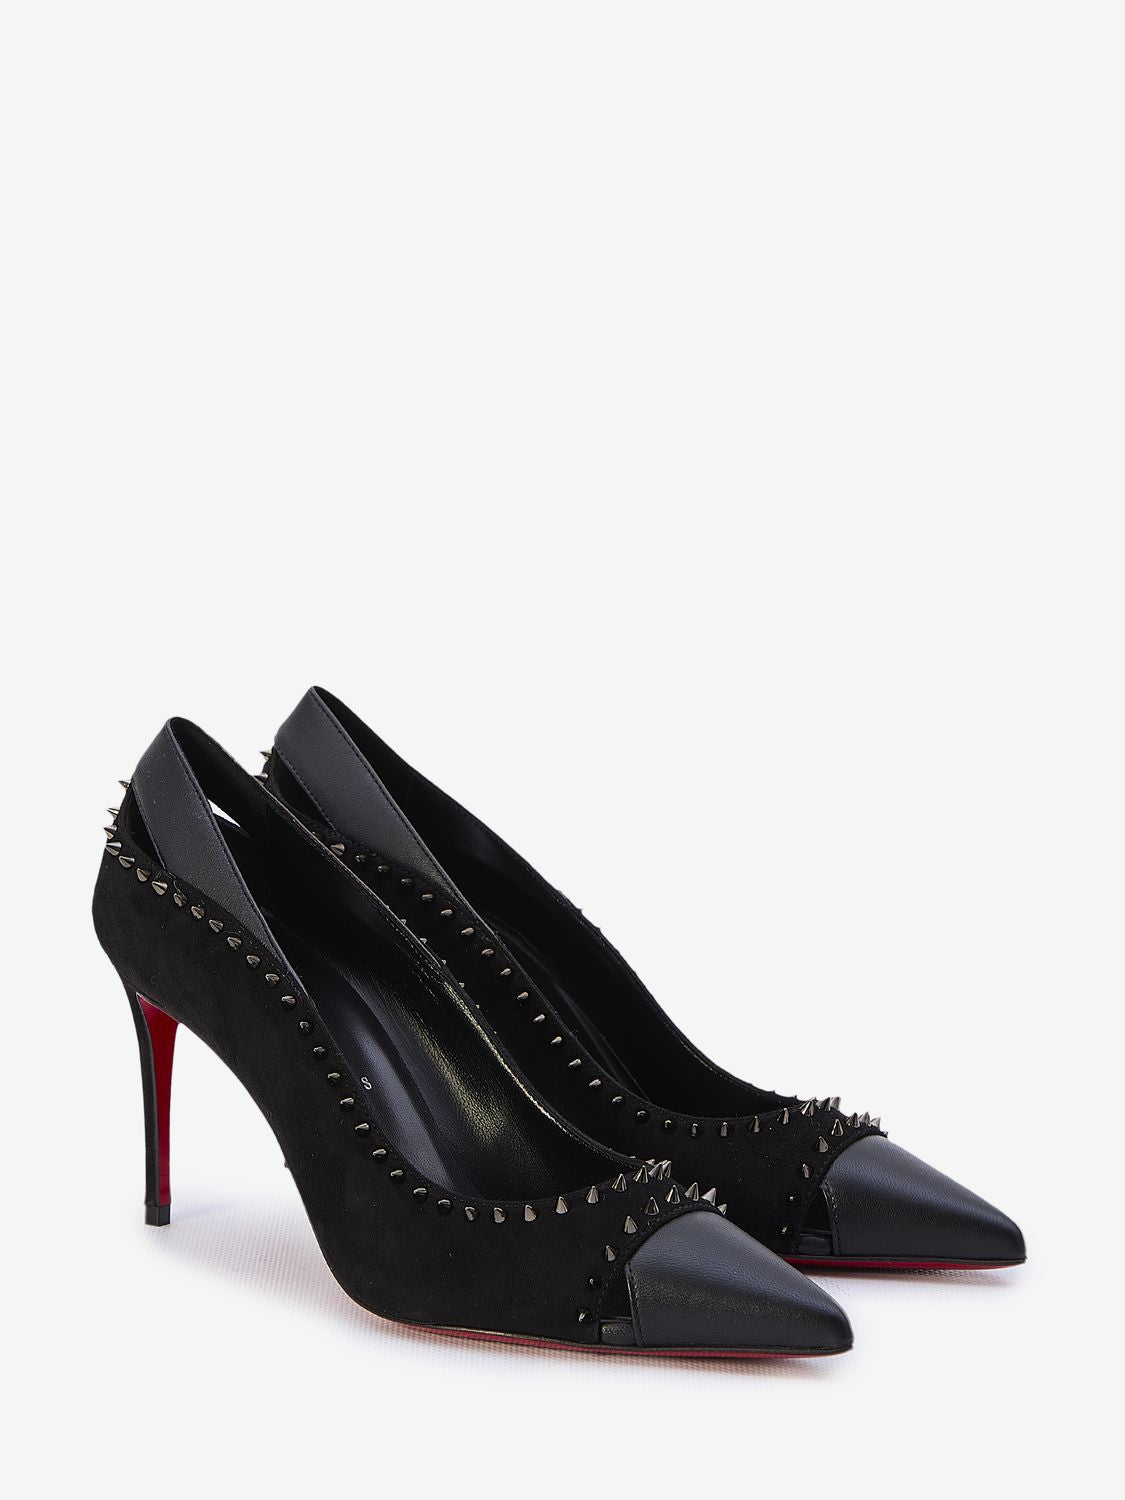 Spike-Strap Leather Pumps with Stiletto Heel and Red Sole for Women - Black